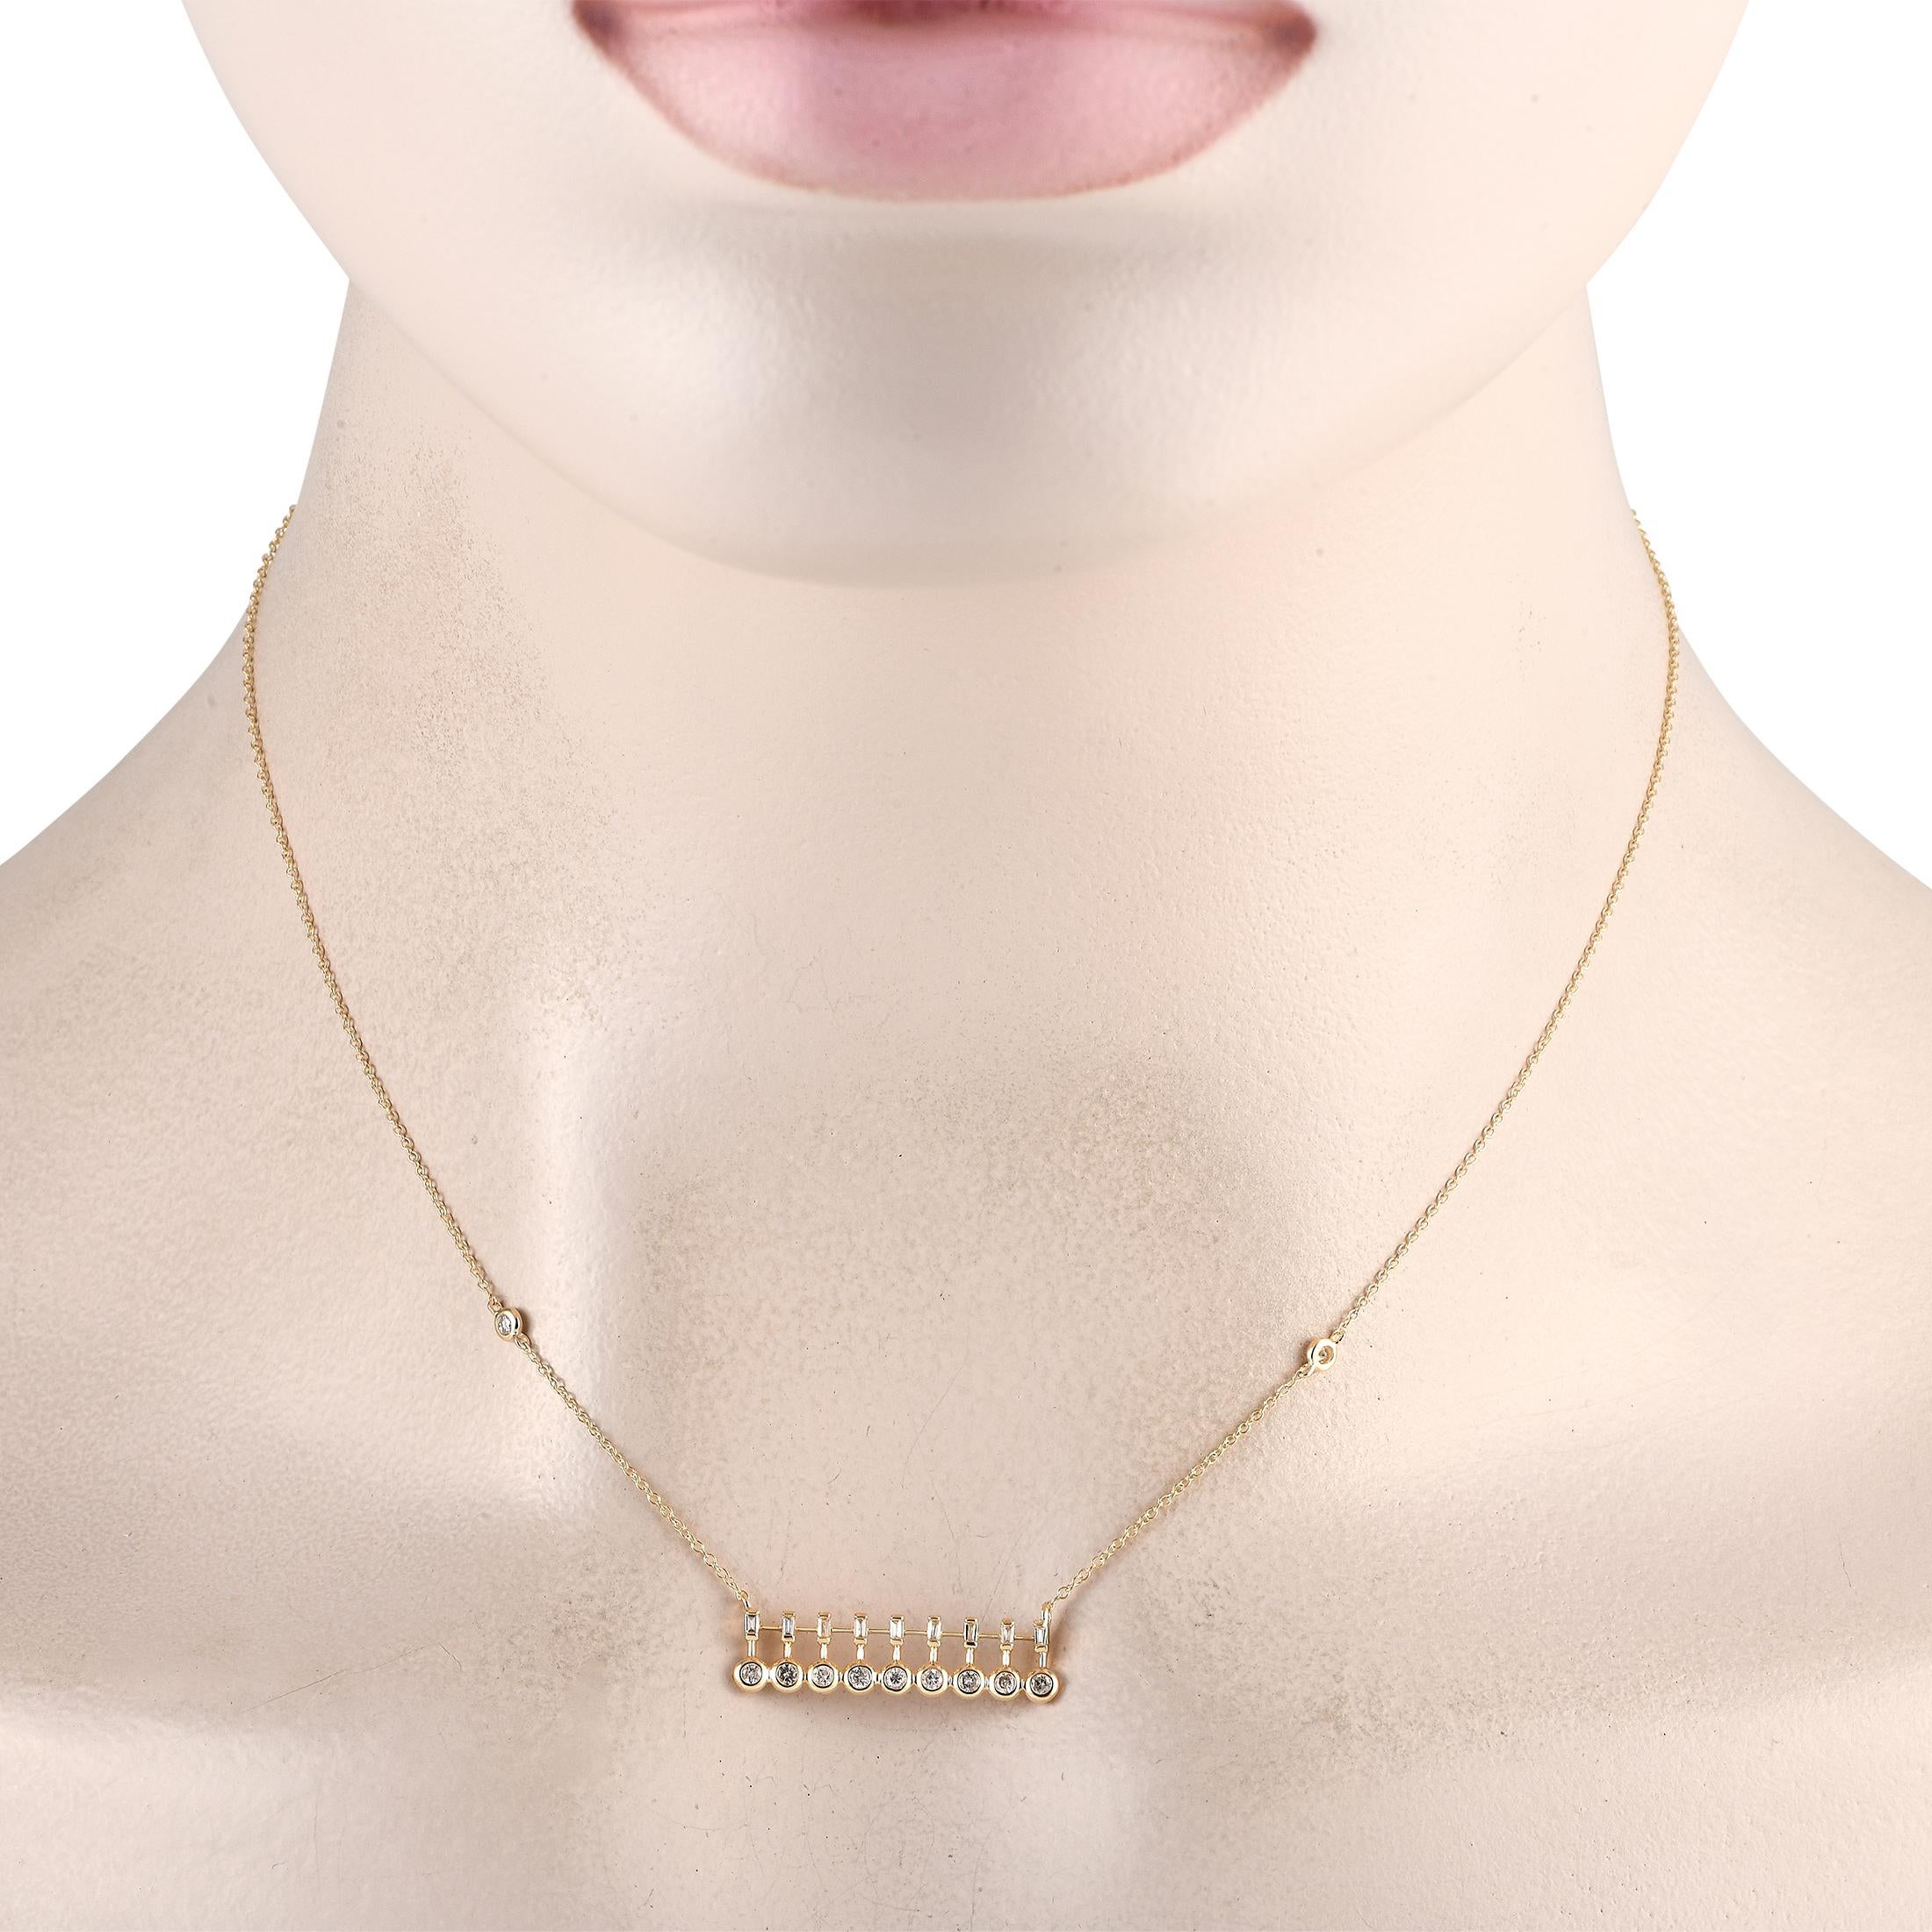 A glittering jewel you can effortlessly take from office to dinner. This trendy piece features a 15 long chain with two bezel-set round diamond stations and a lobster clasp. It holds a horizontal pendant with a stylized pattern of round and step-cut